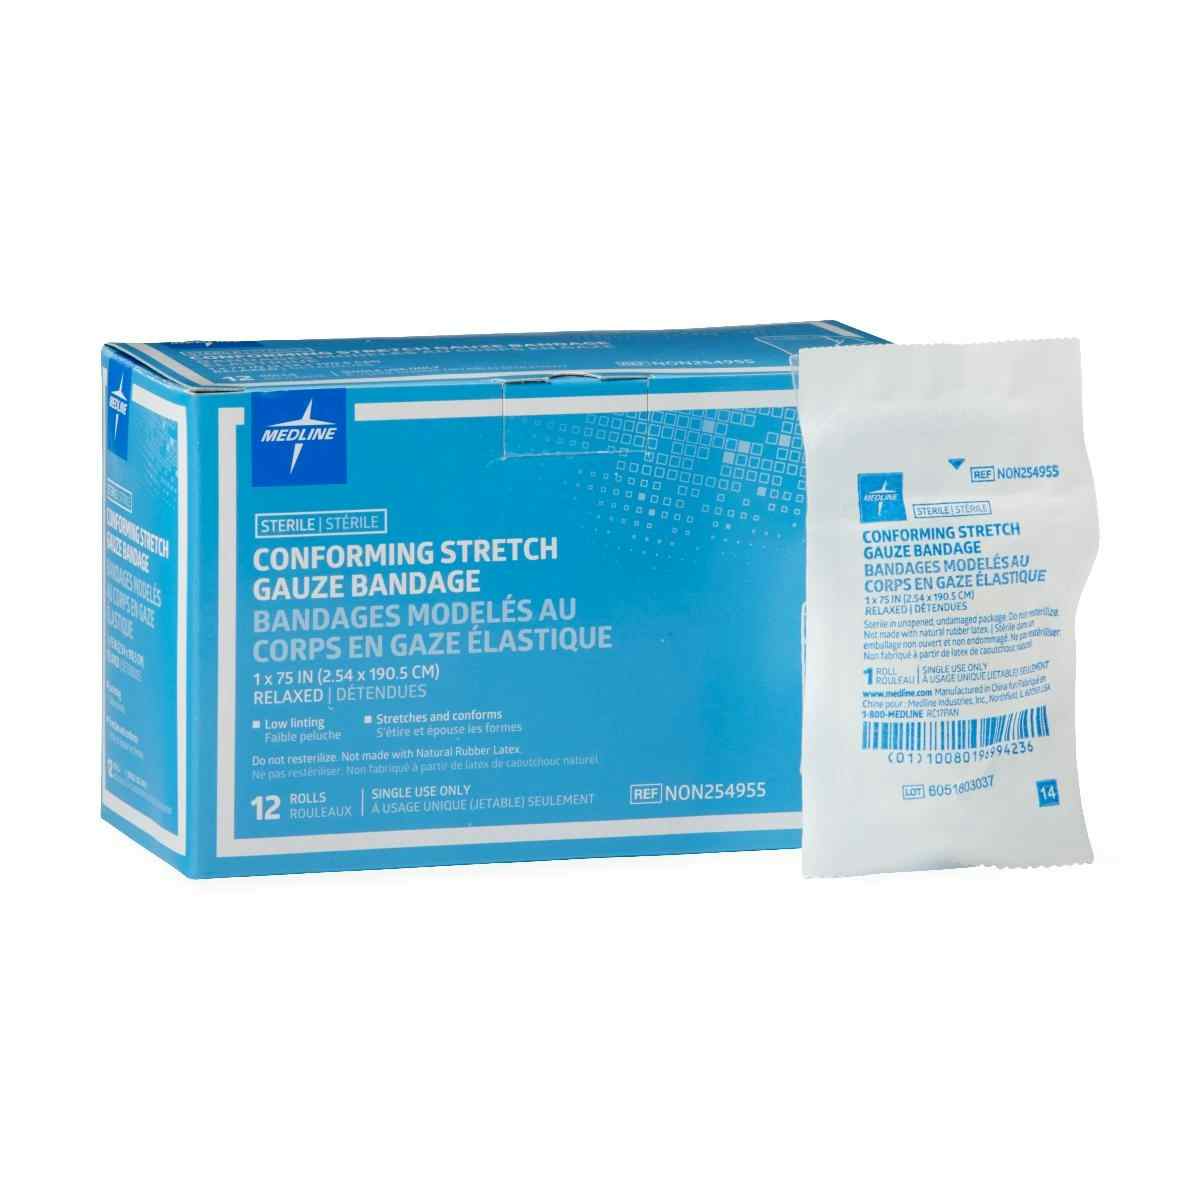 Medline Conforming Stretch Gauze Bandages, Heavy Weight, NON25498, 4" X 75" - Case of 96